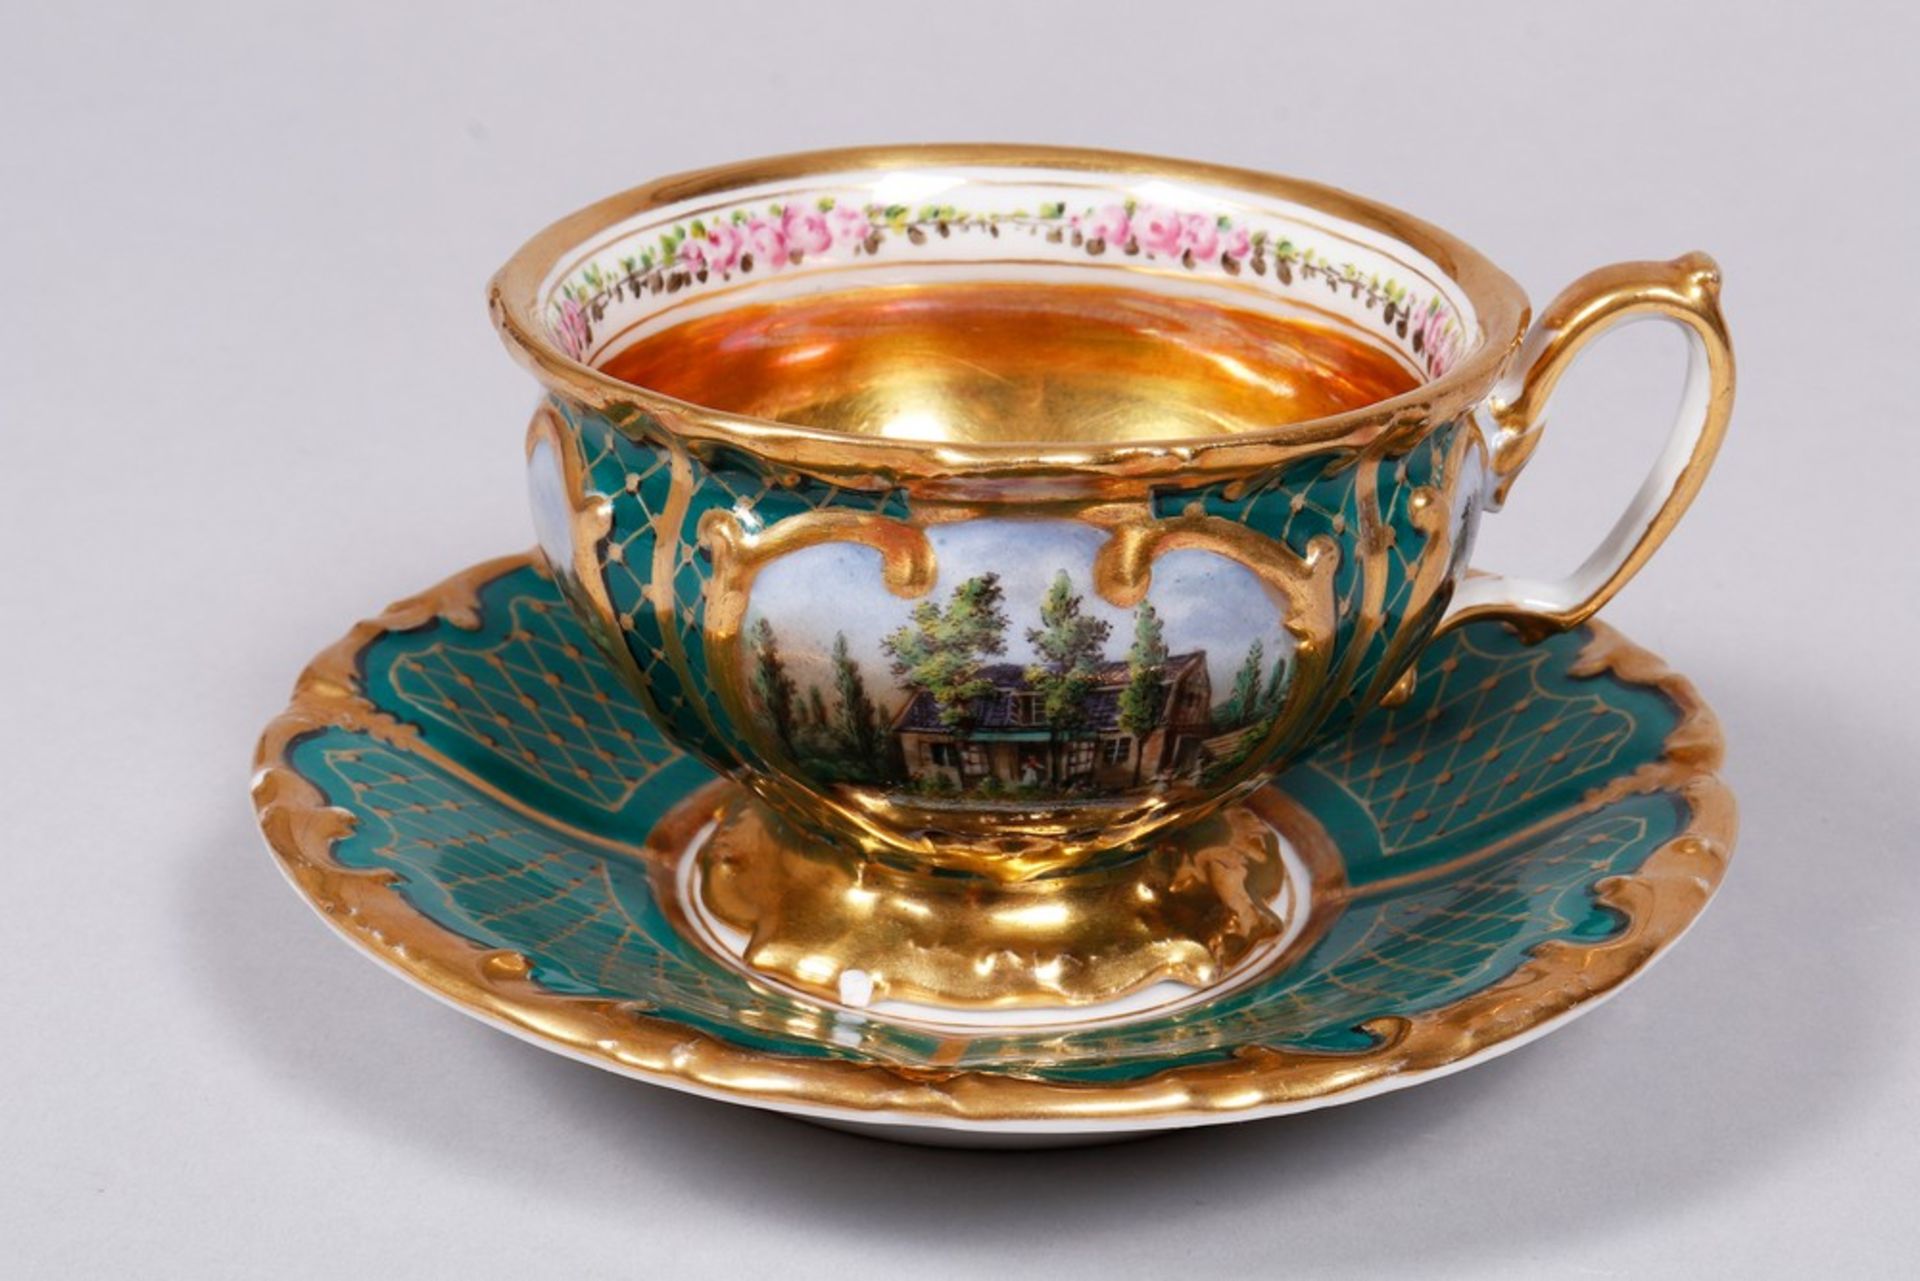 Biedermeier cup and saucer, probably Thuringia, ca. 1841 - Image 2 of 8